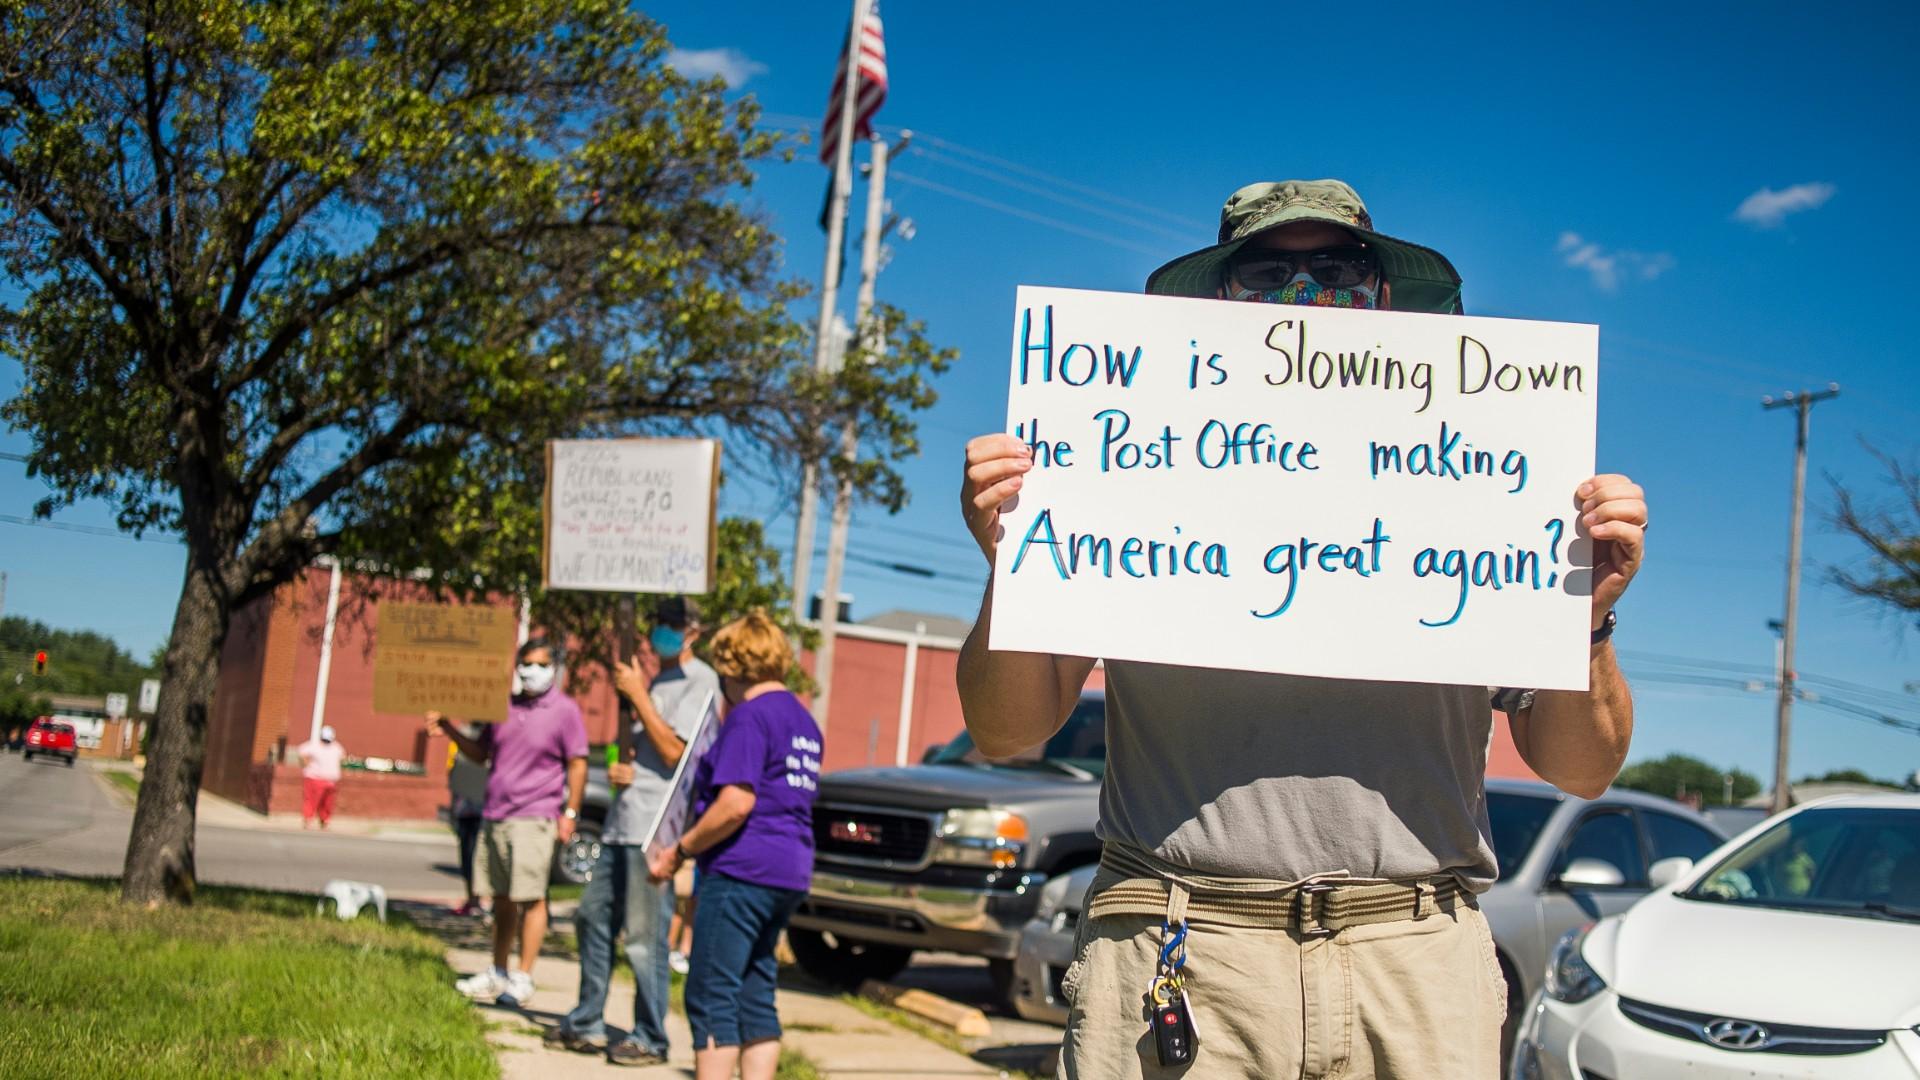 Eric Severson holds a sign as a few dozen people gather in front of the United States Post Office on Rodd St. to protest recent changes to the U.S. Postal Service under new Postmaster General Louis DeJoy on Tuesday, Aug. 11, 2020 in Midland, Mich. (Katy Kildee / Midland Daily News via AP)